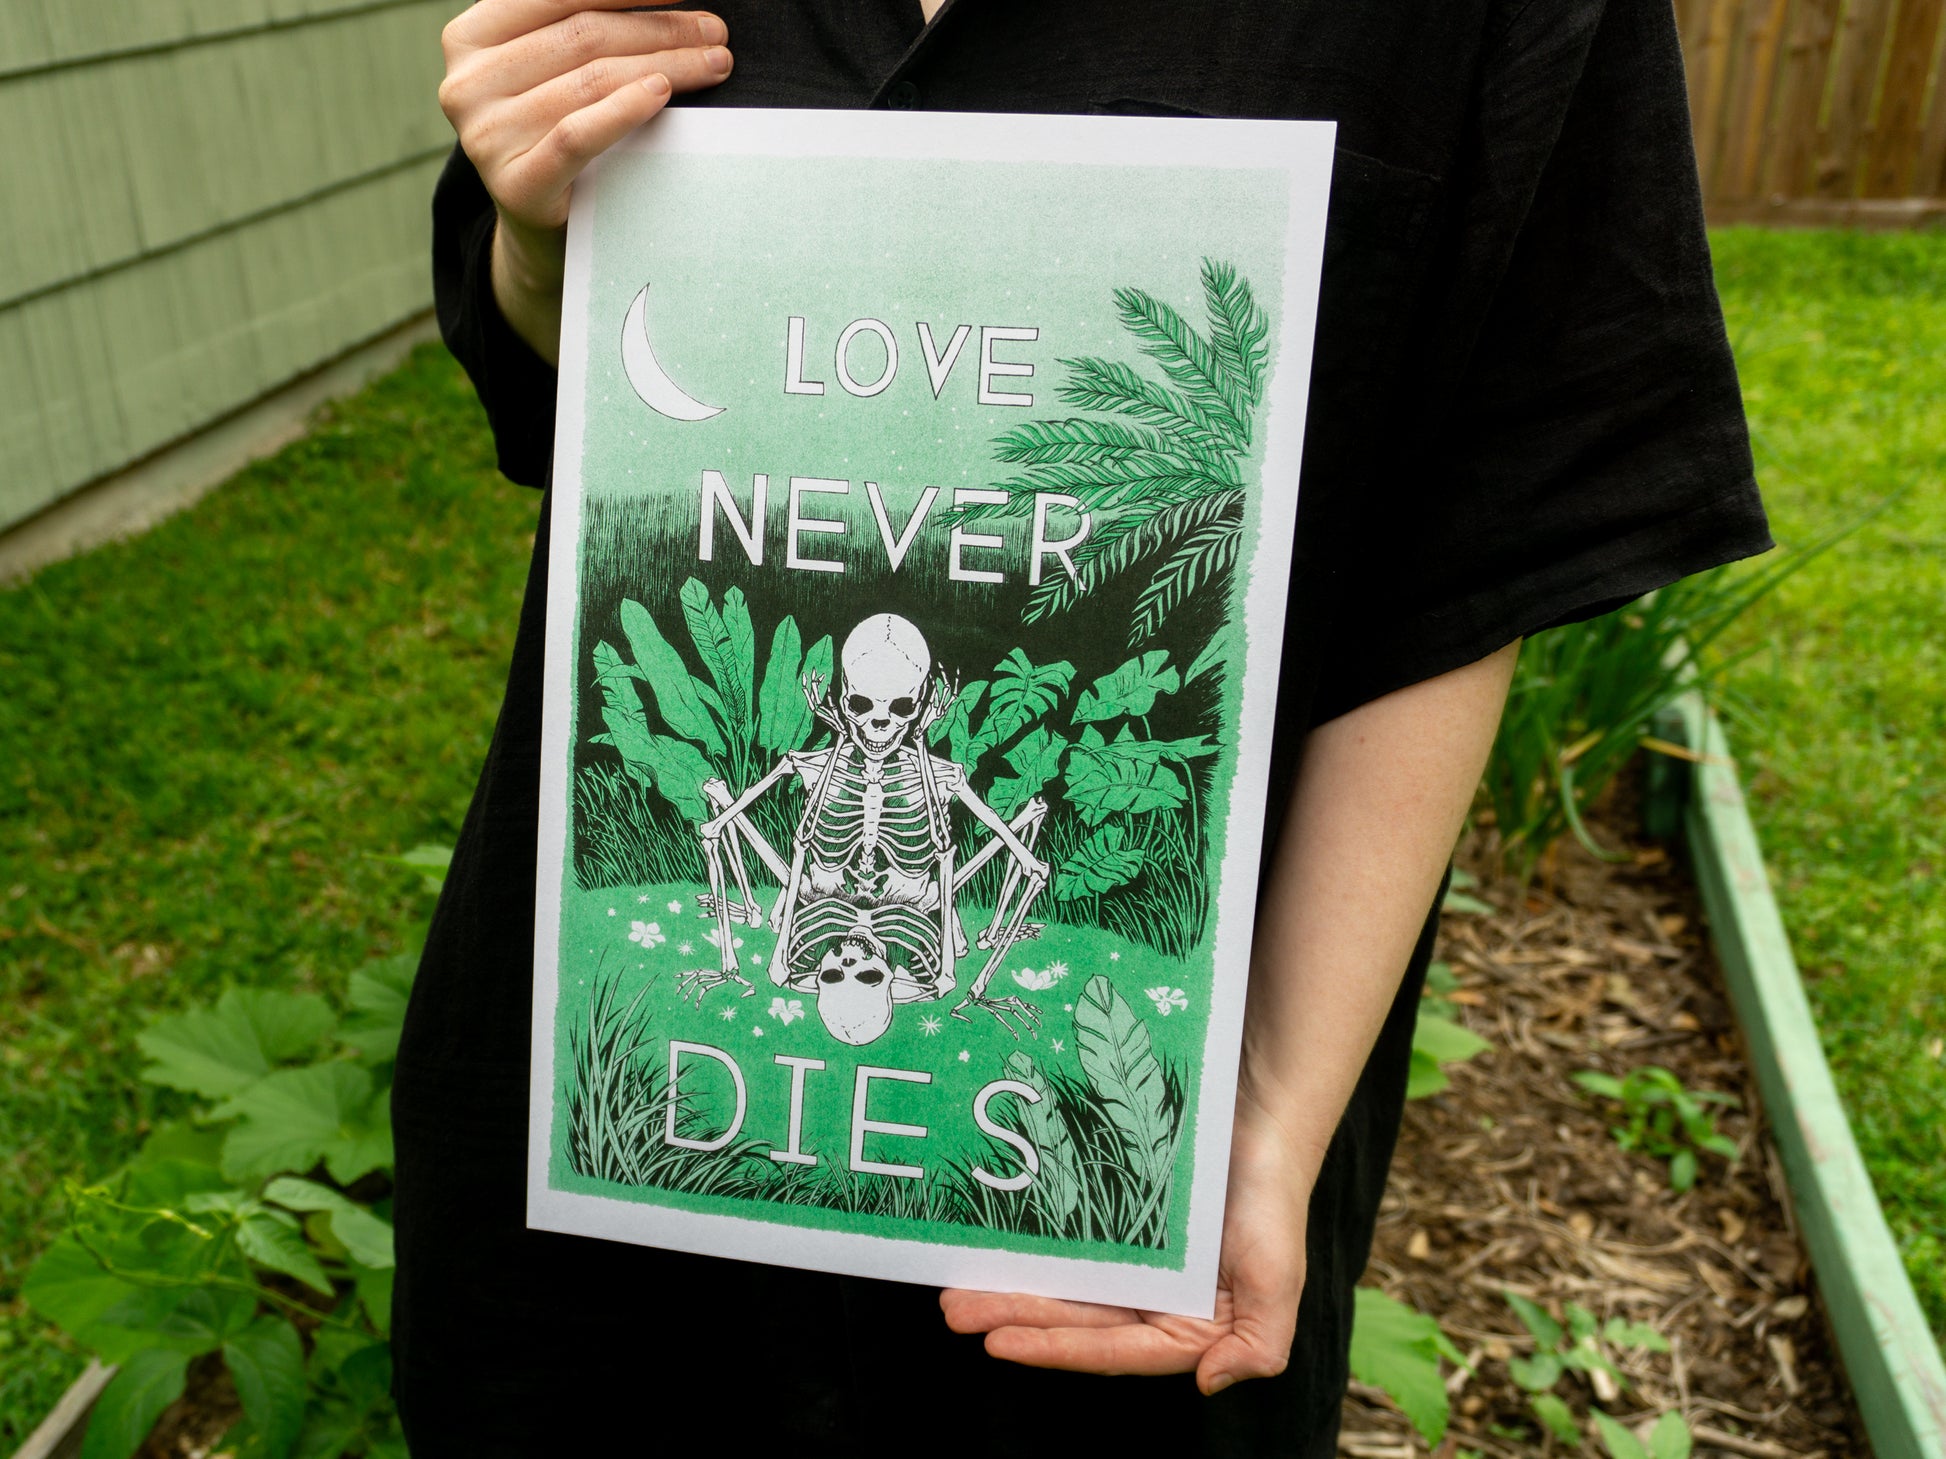 A person wearing black holds a riso print, 10 inches x 16 inches, in front of a garden. The print has two skeletons in love doing it in a field of green.